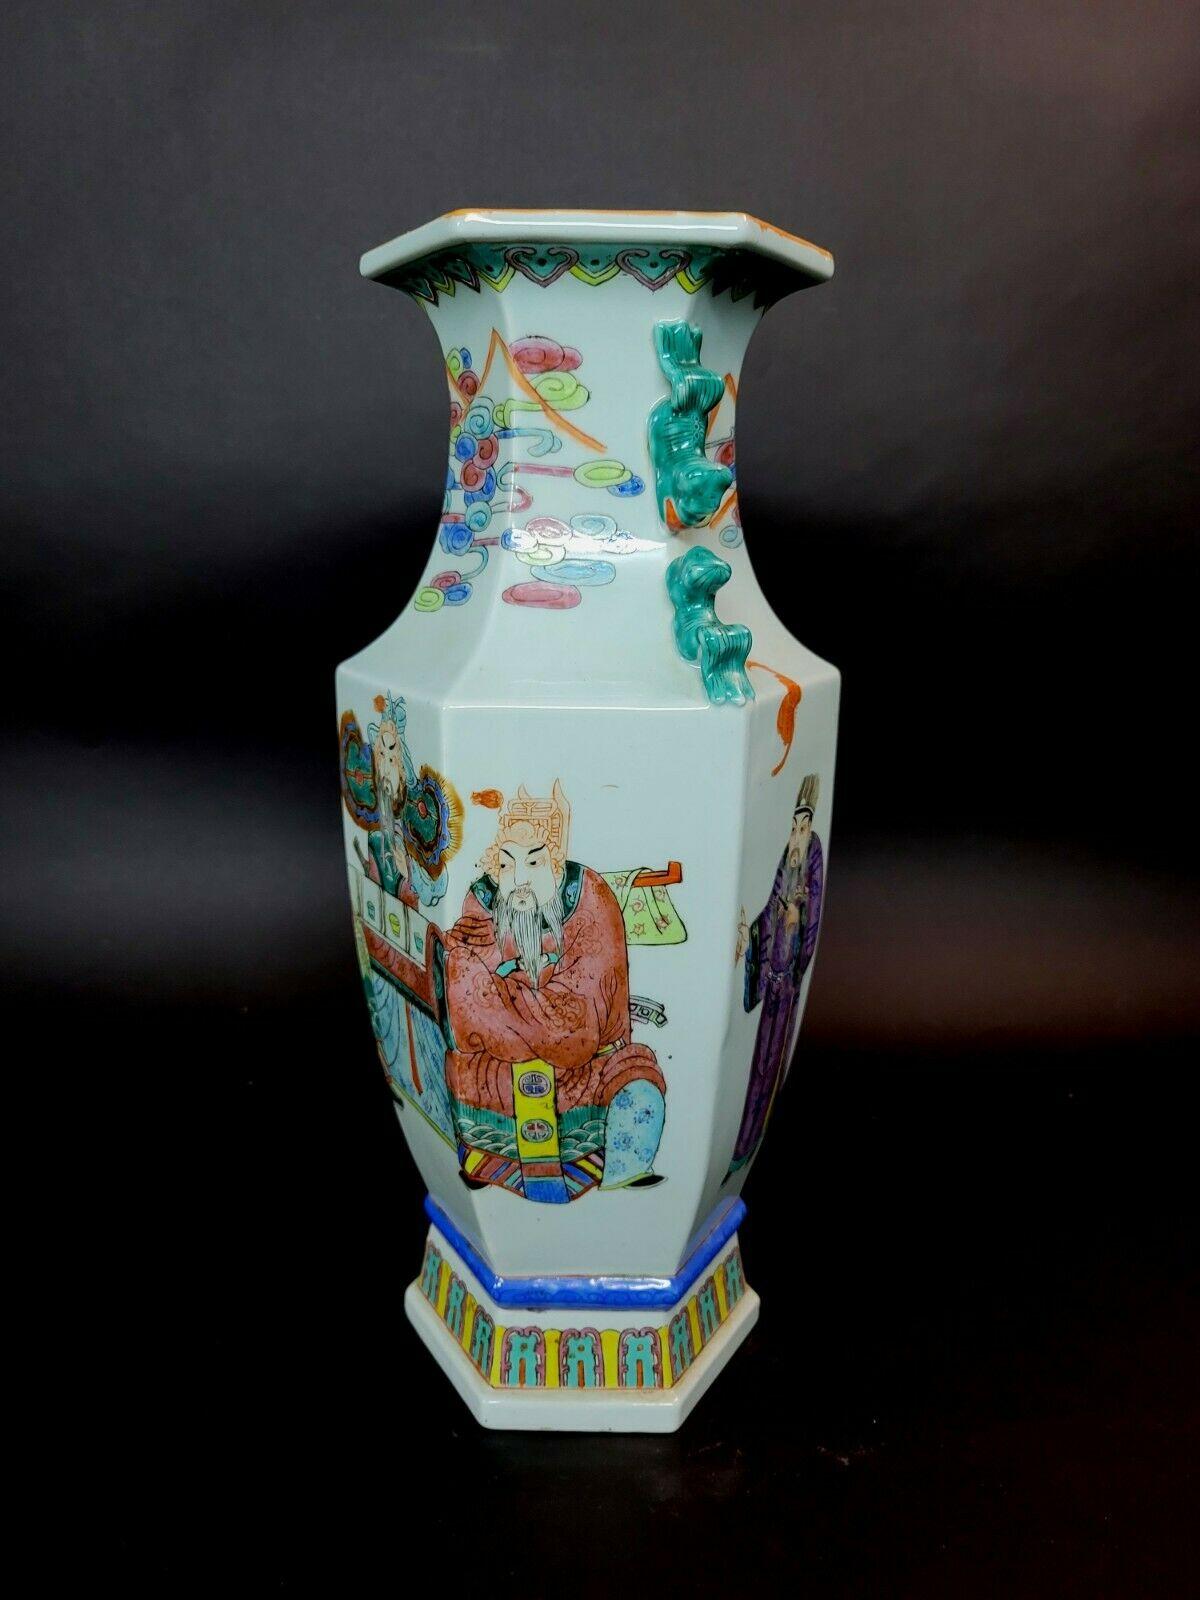 An emperor is commanding his attendants. The neck has foo dog handles and swirling multicolor clouds. Orange bats fly on the back of the vase.



 